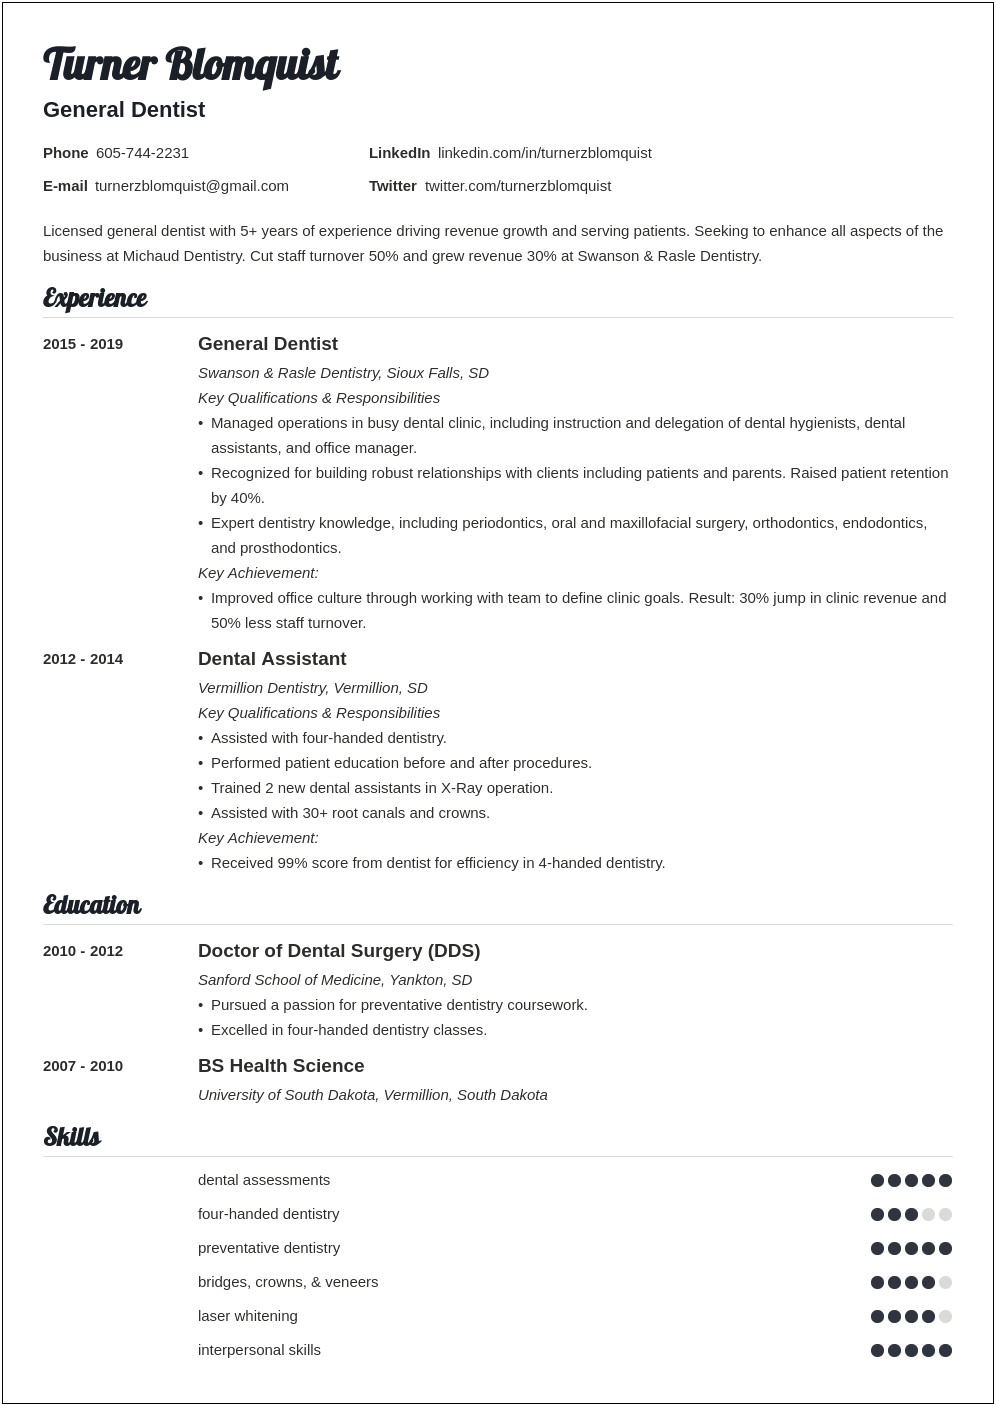 General Dentist Resume Objective Examples